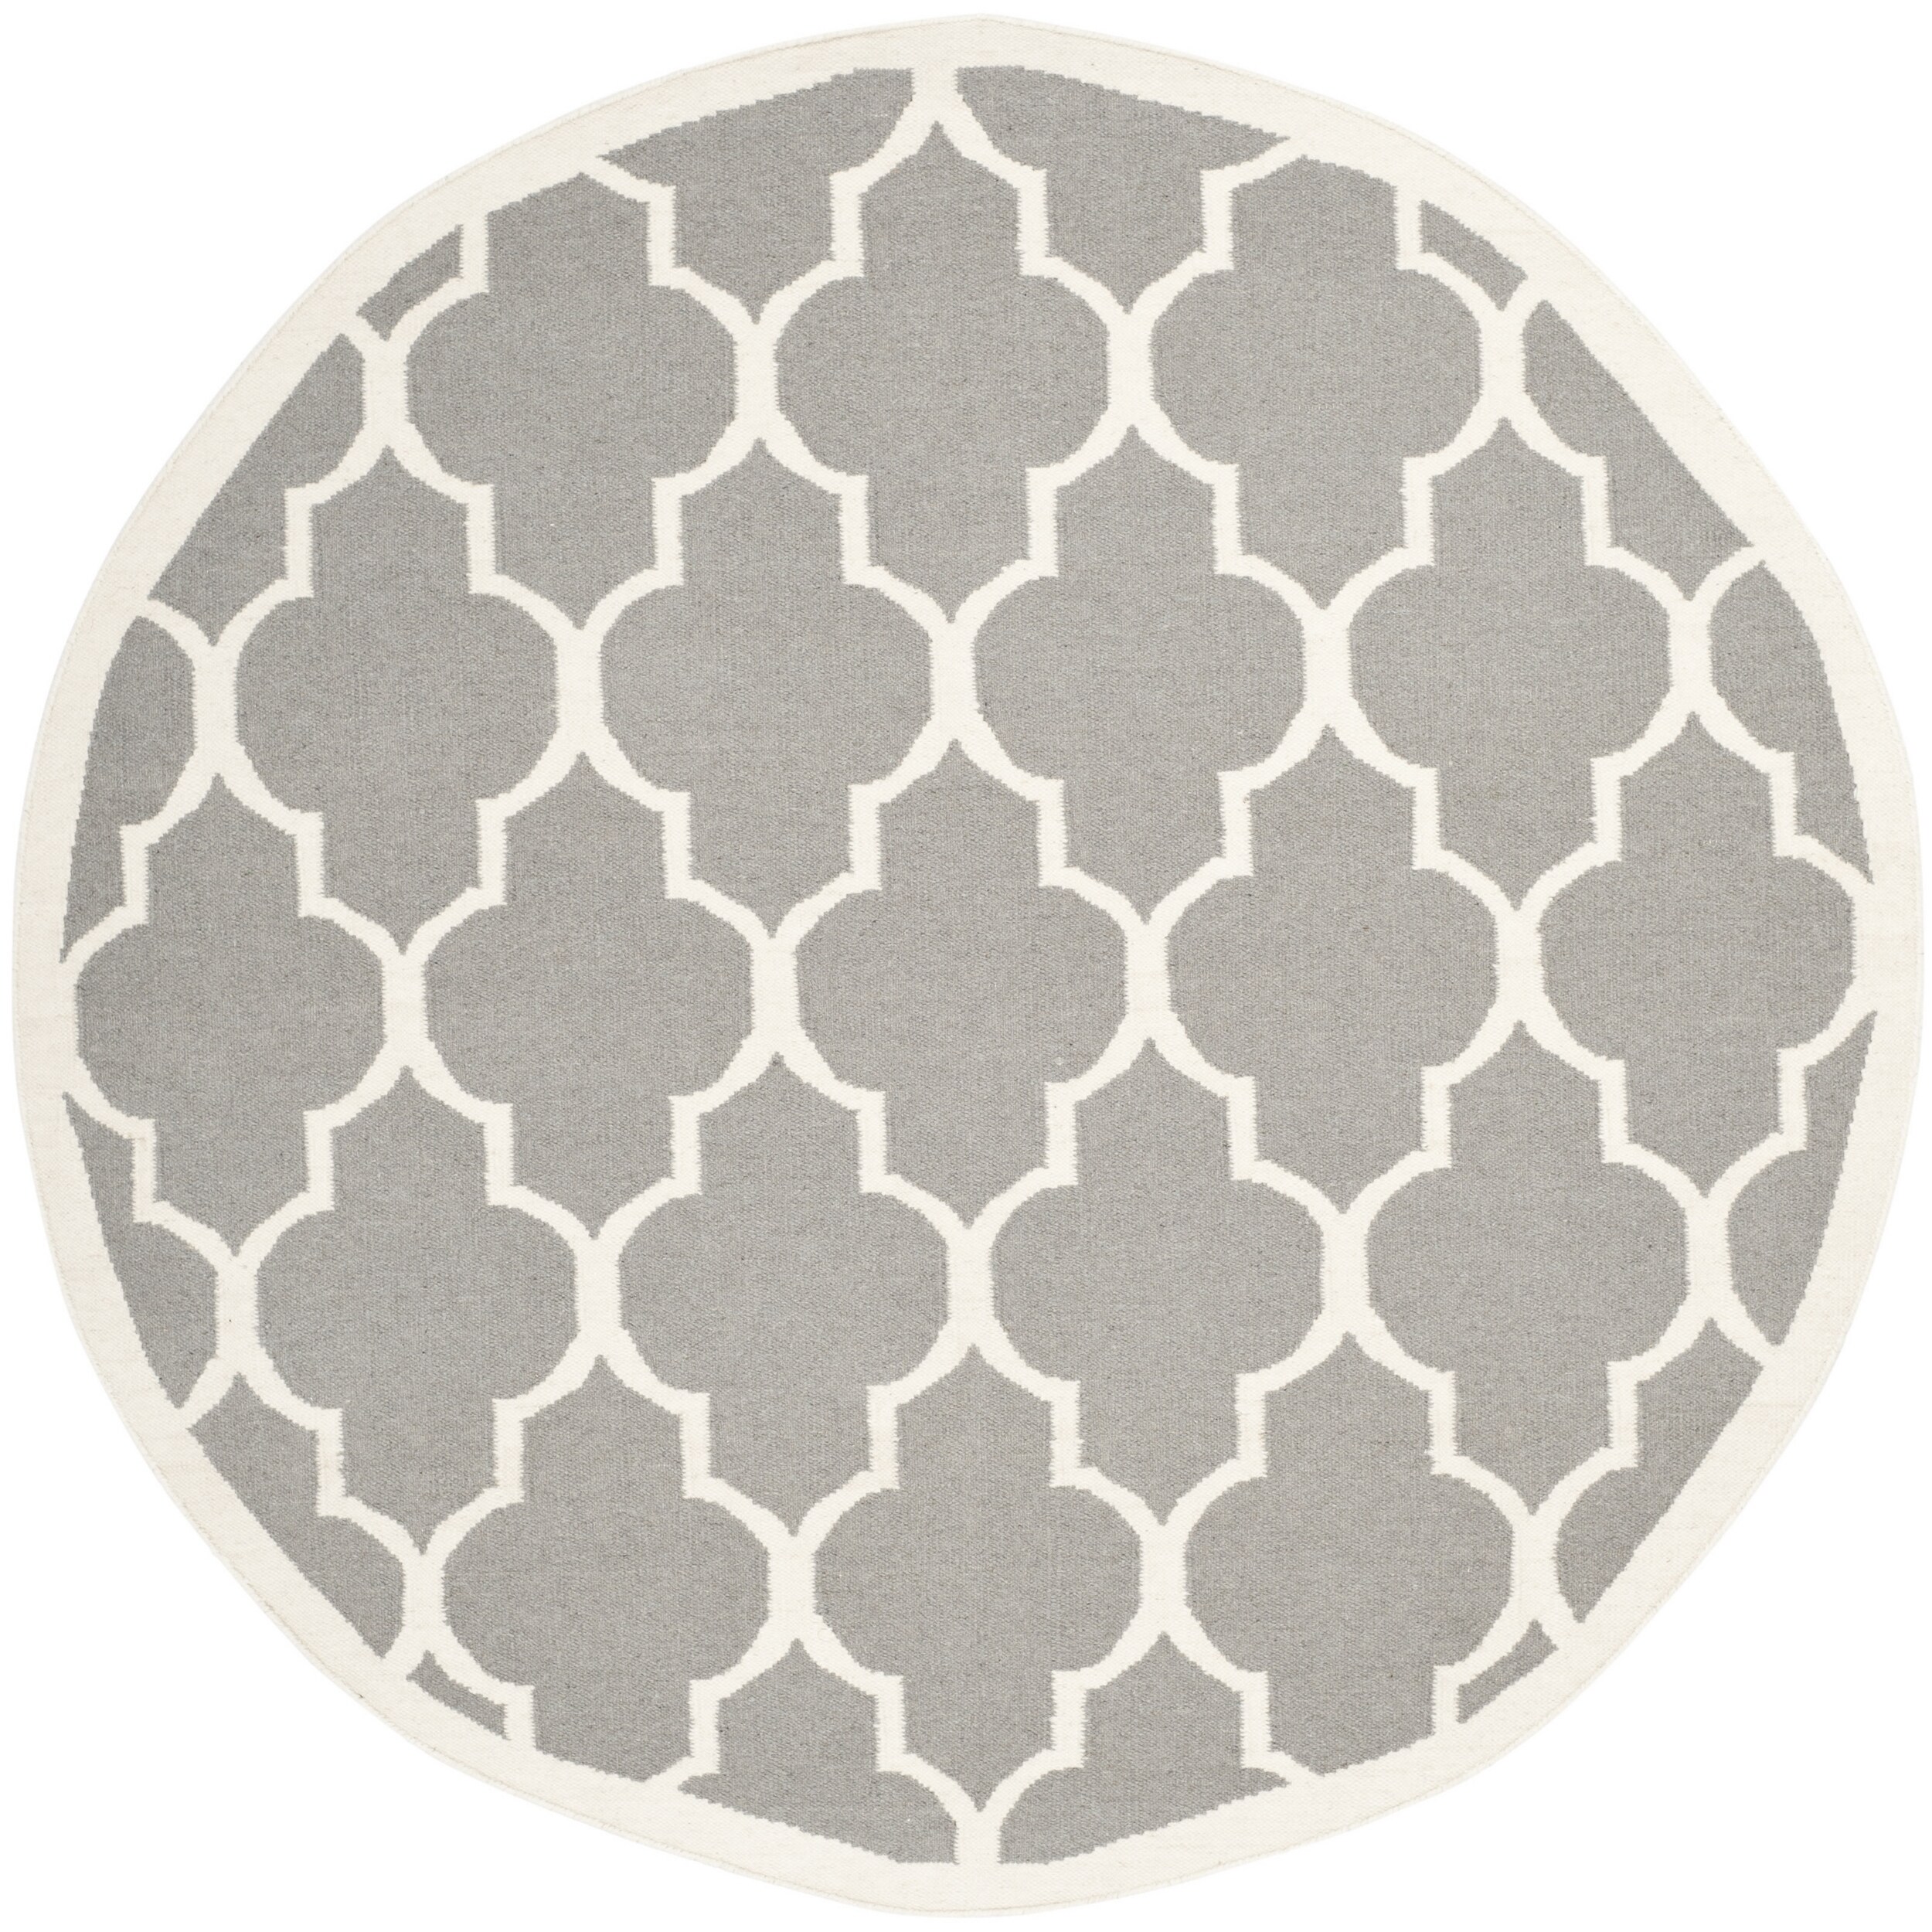 Safavieh Handwoven Moroccan Dhurrie Soft Gray/ Ivory Wool Rug (6 Round)